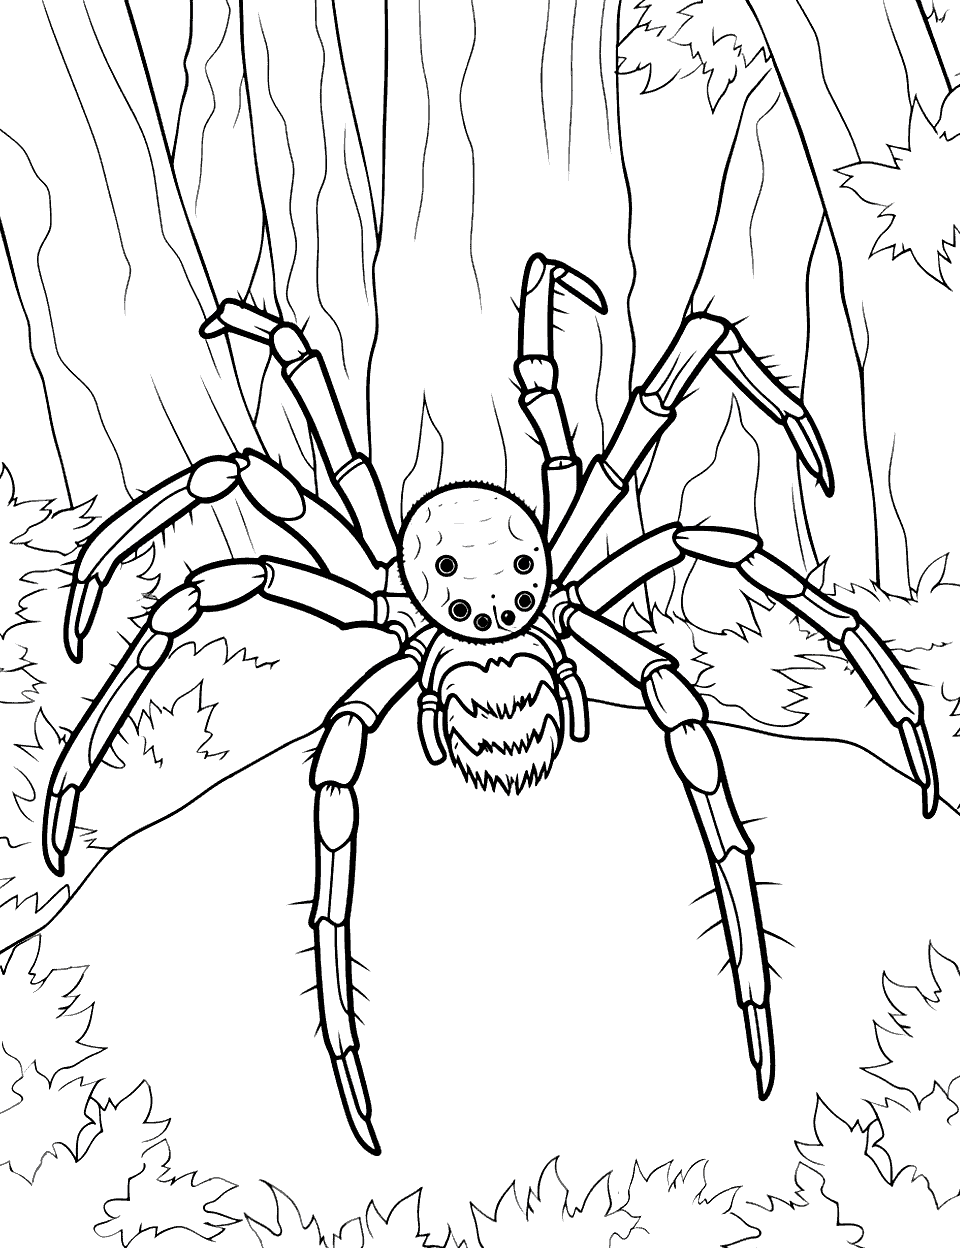 Spider in a Forest Coloring Page - A spider in a dense forest.